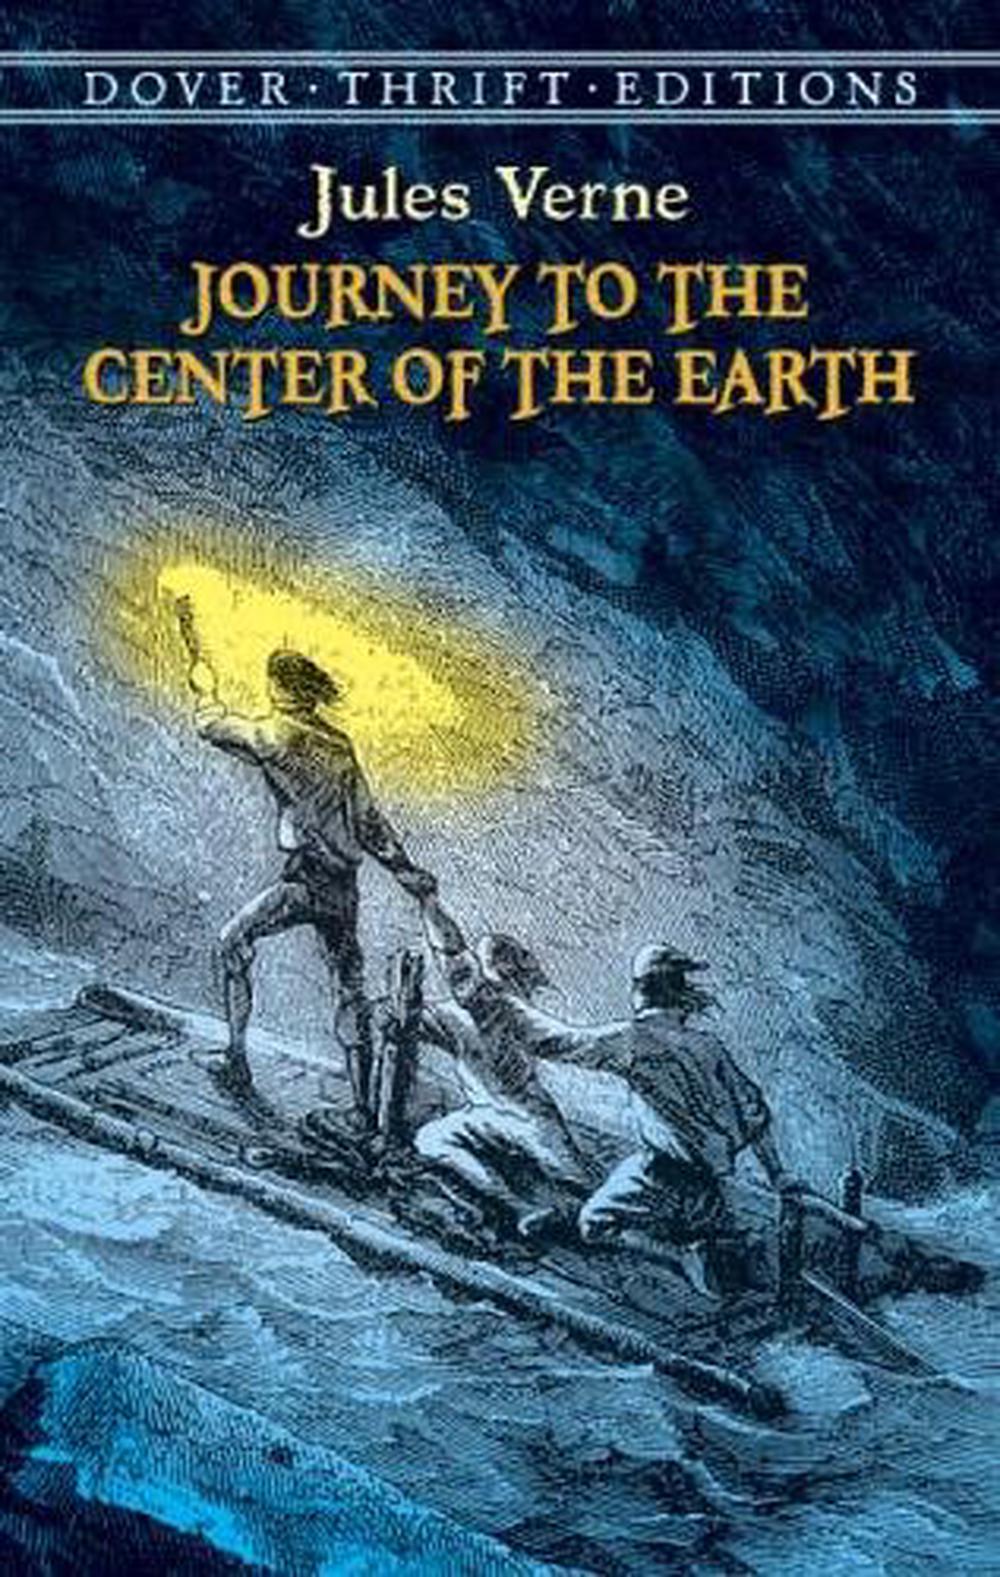 journey to the center of the earth book author